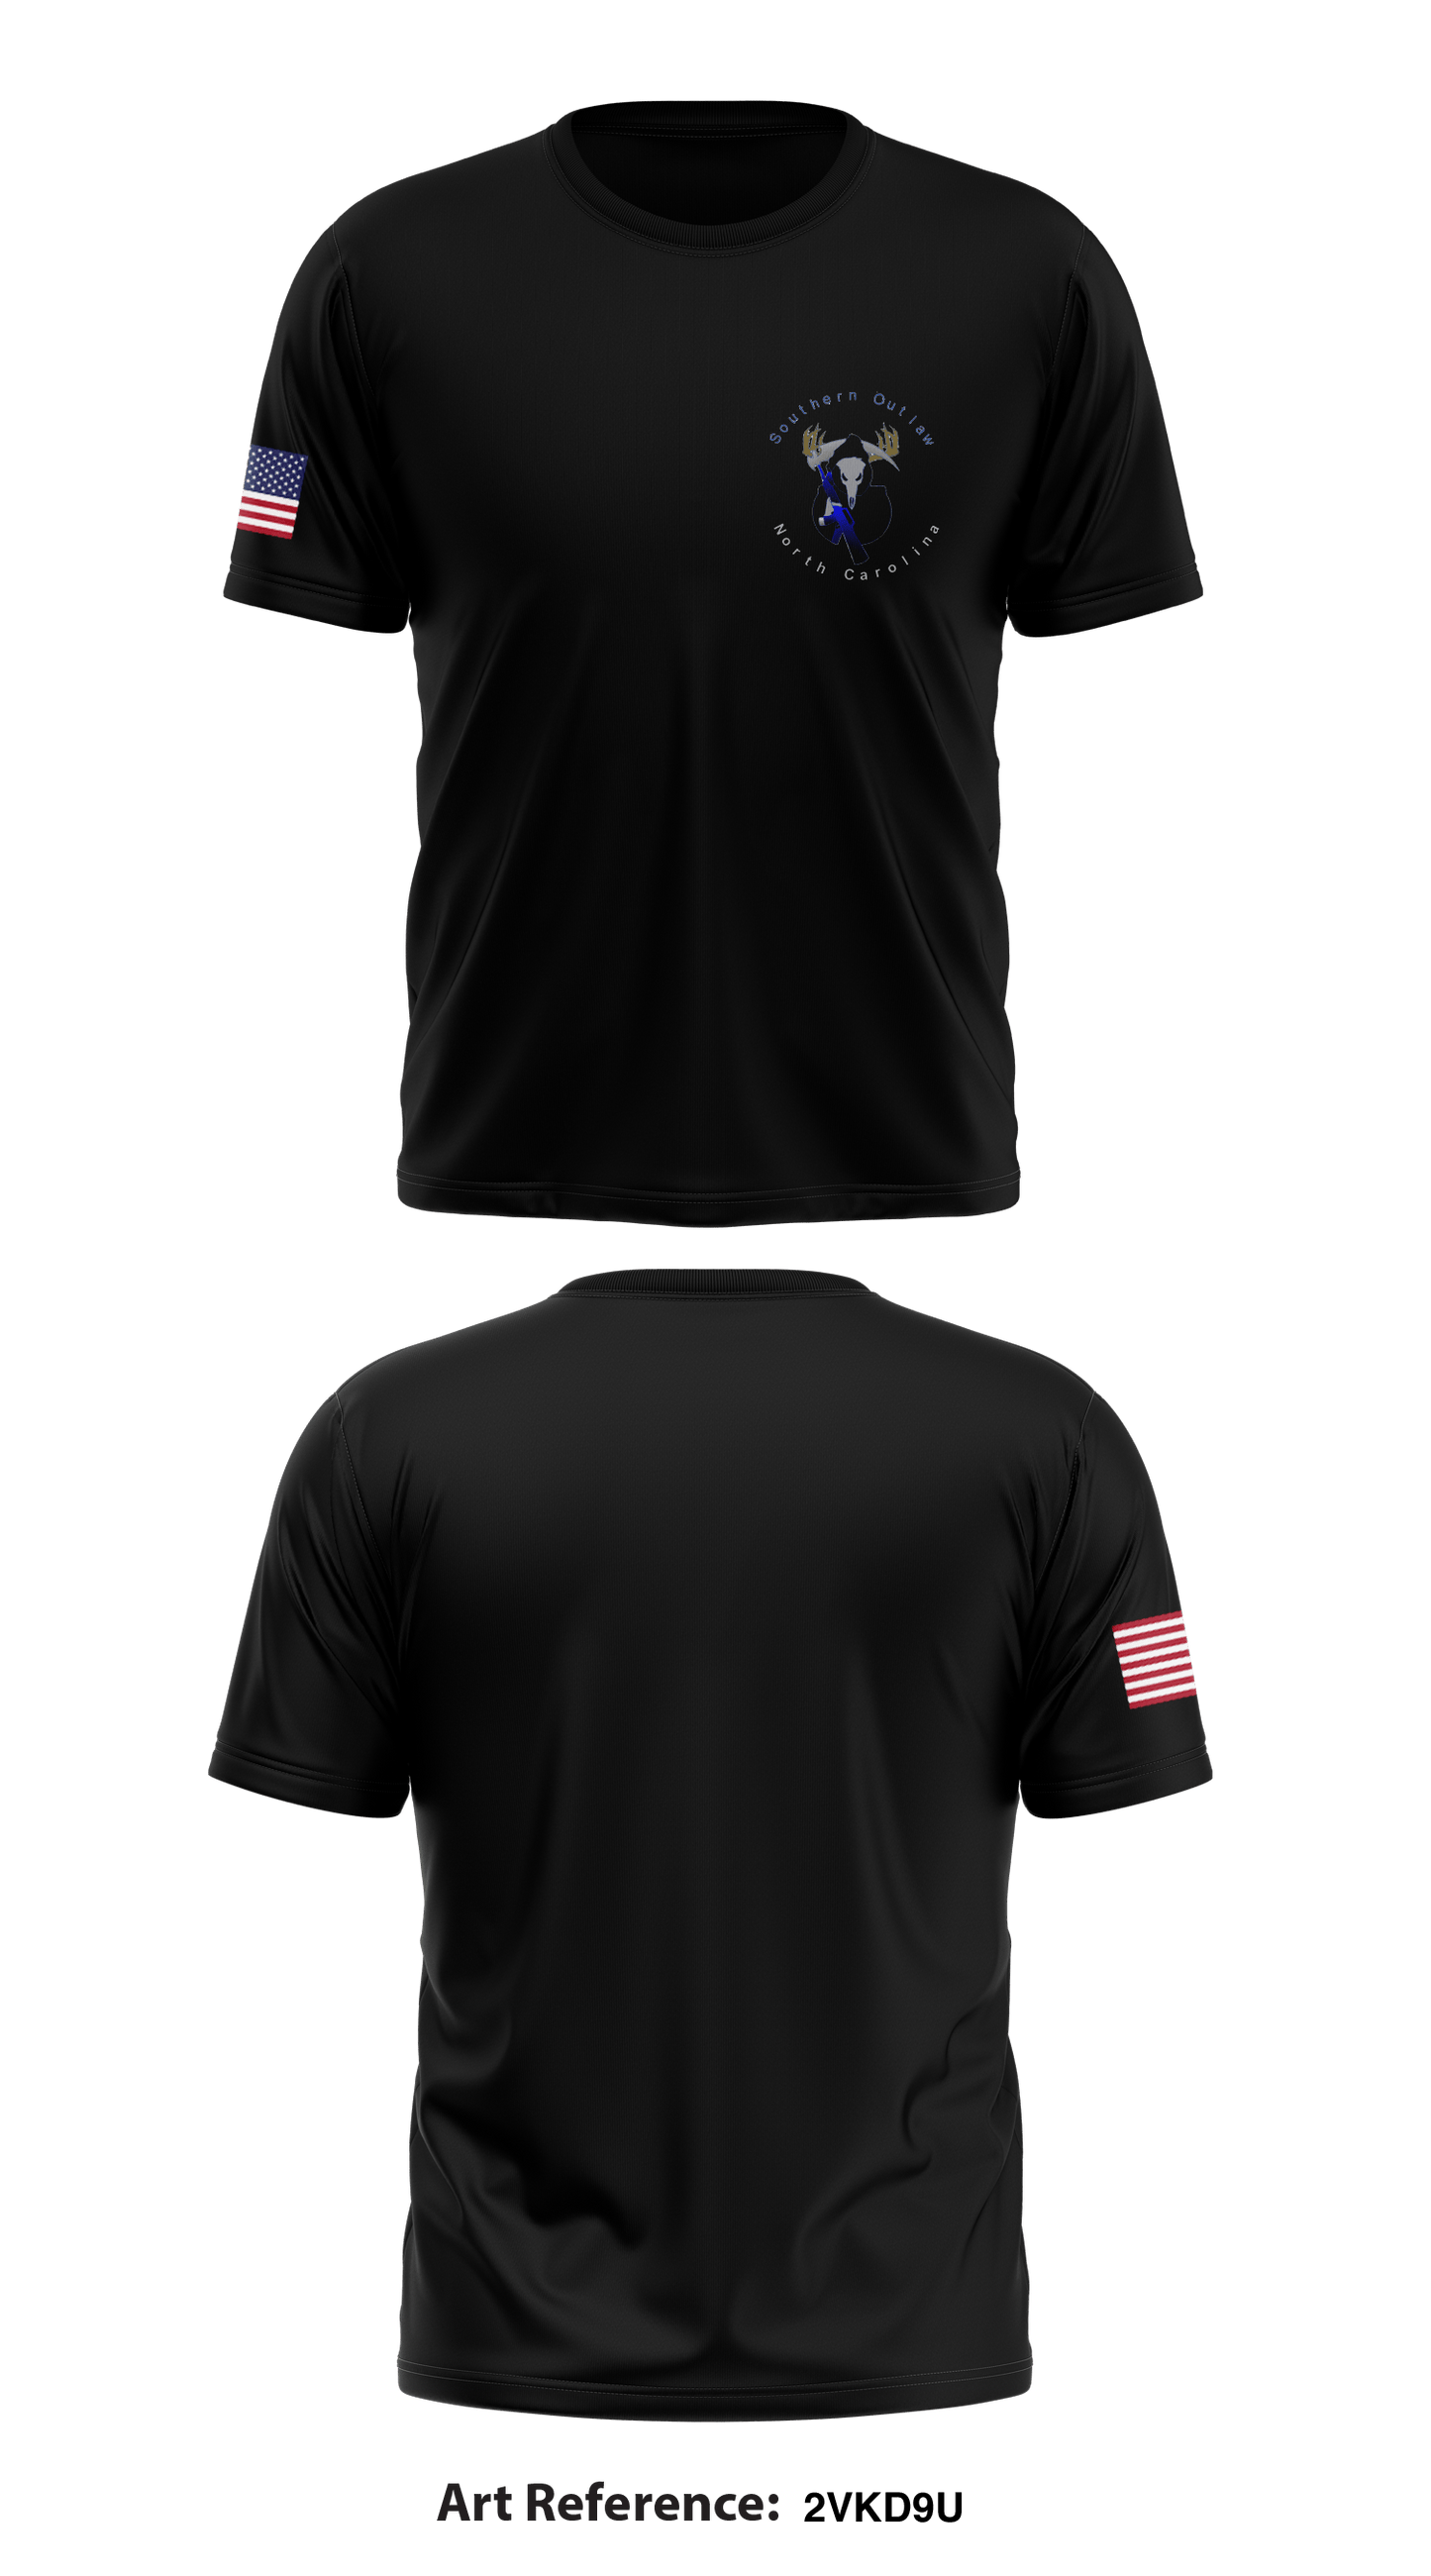 Southern Outlaws Store 1 Core Men's SS Performance Tee - 2Vkd9u